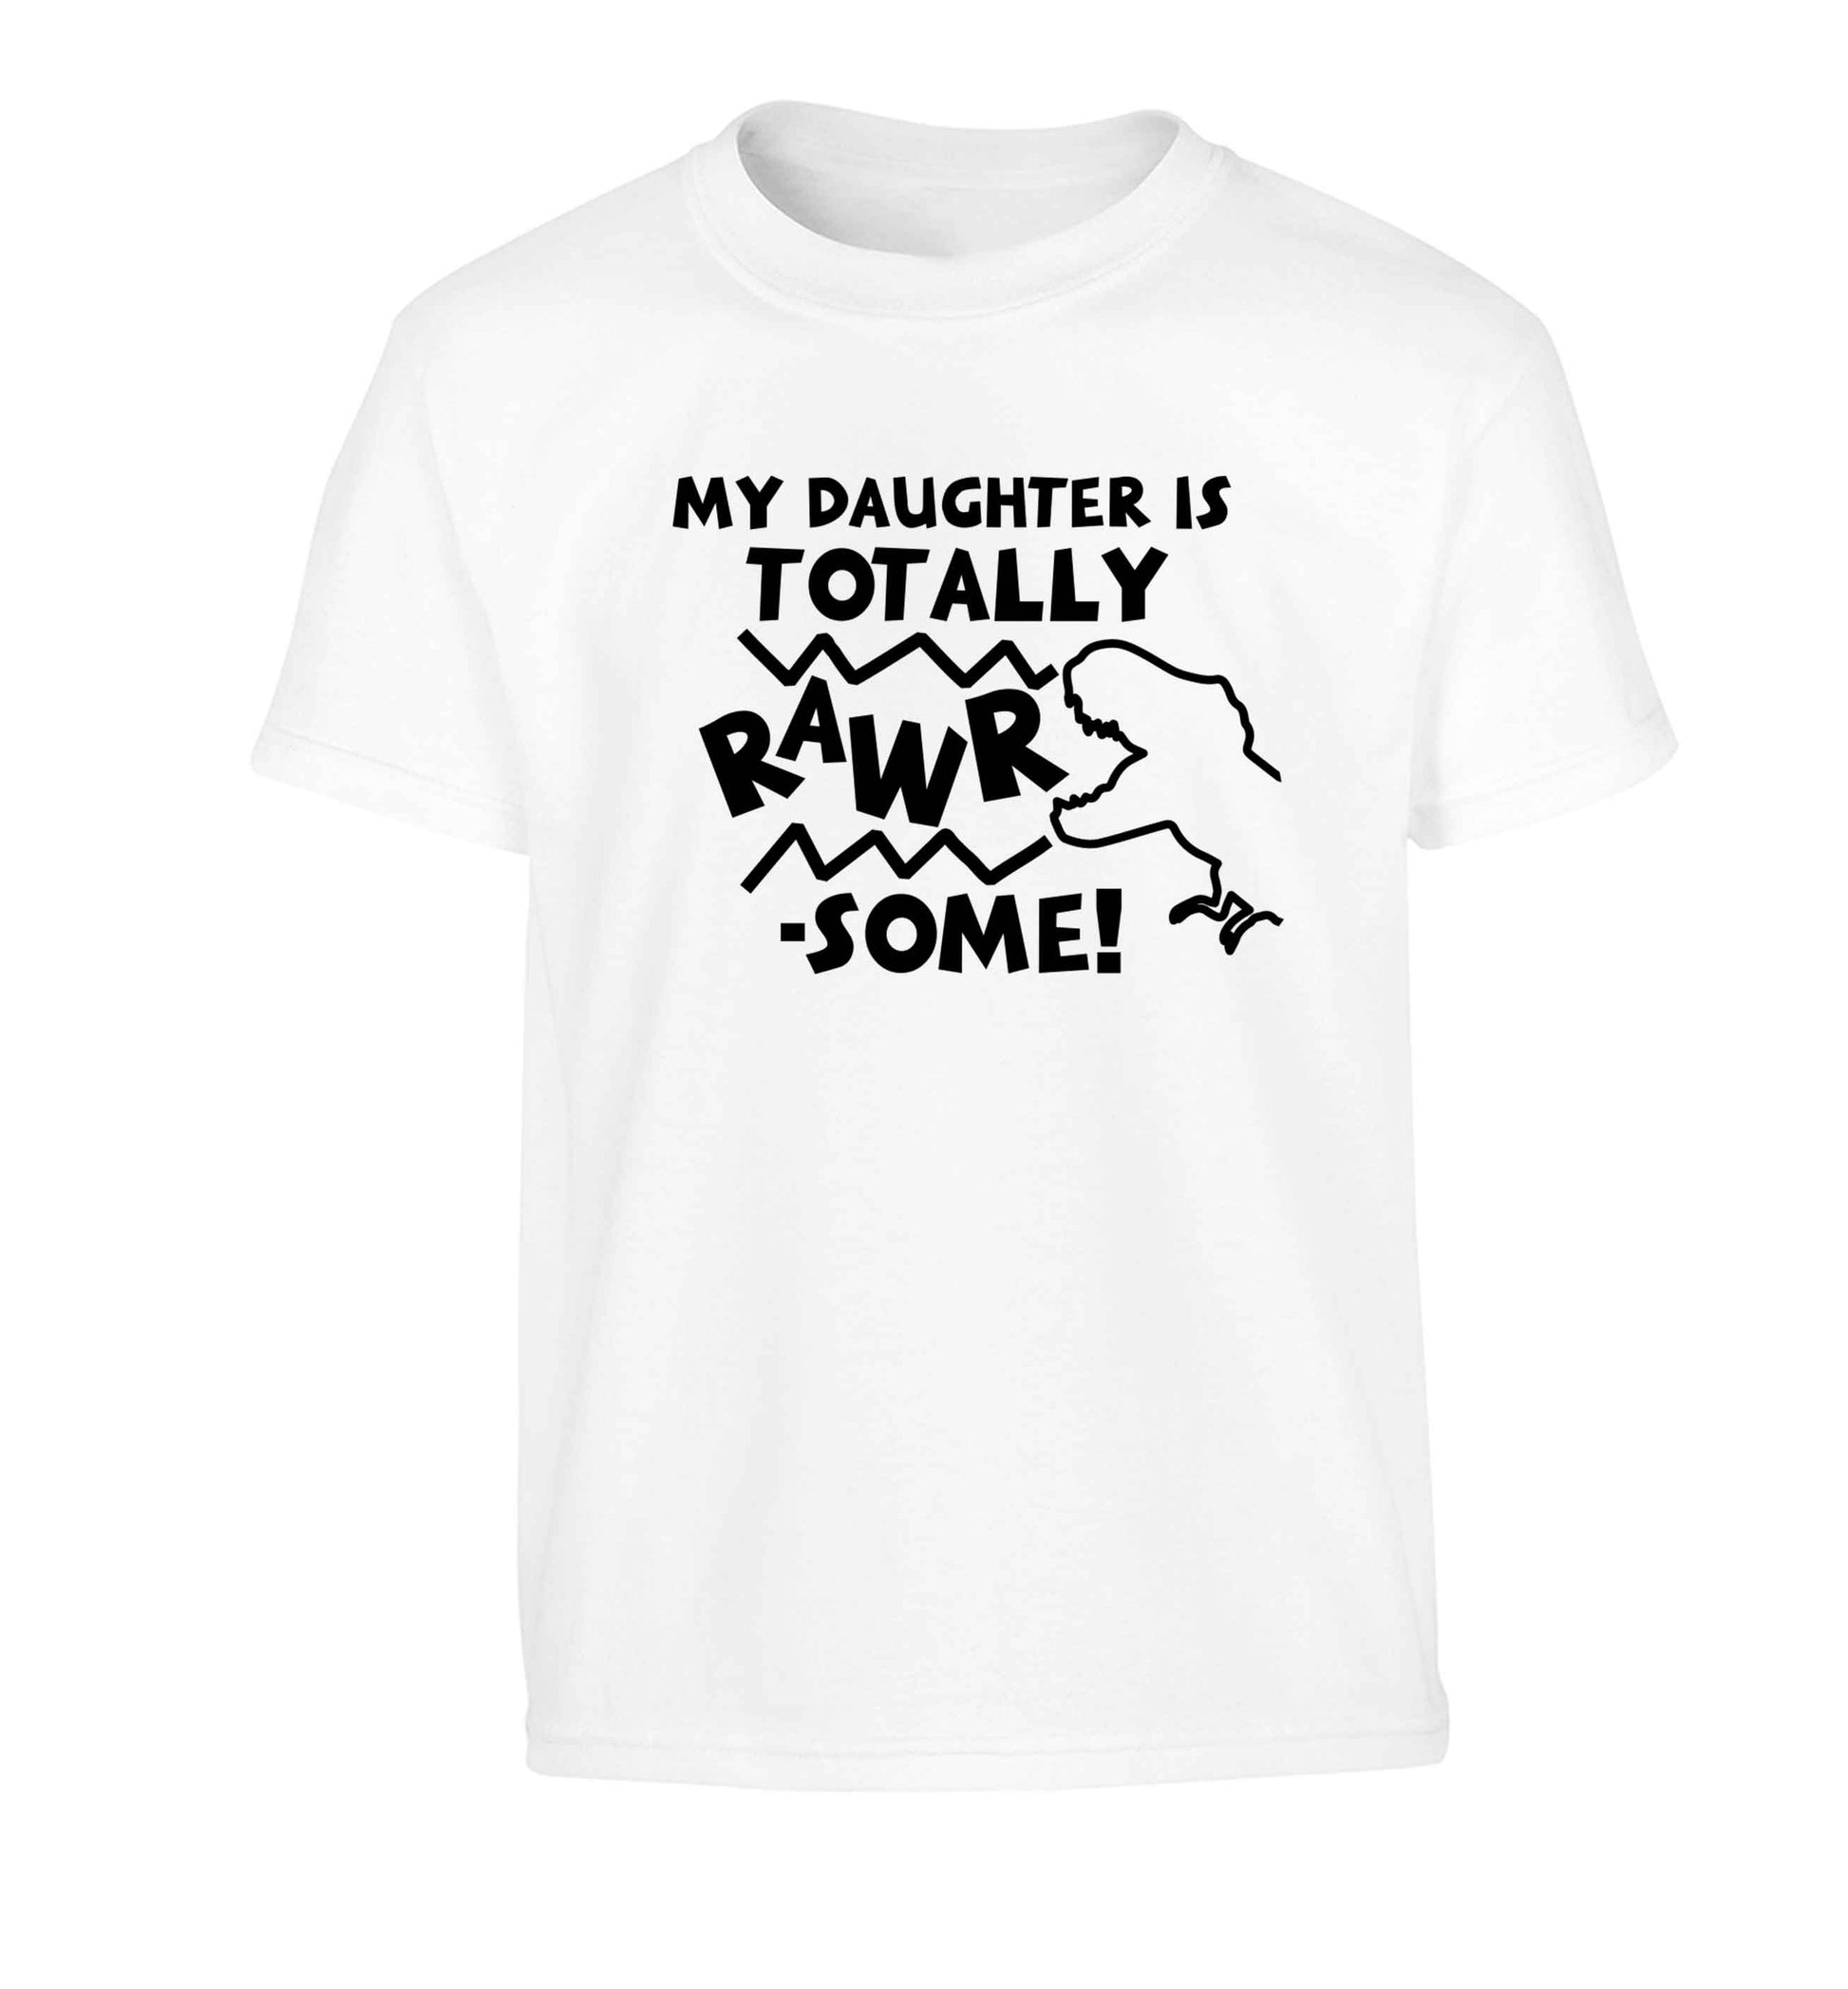 My daughter is totally rawrsome Children's white Tshirt 12-13 Years